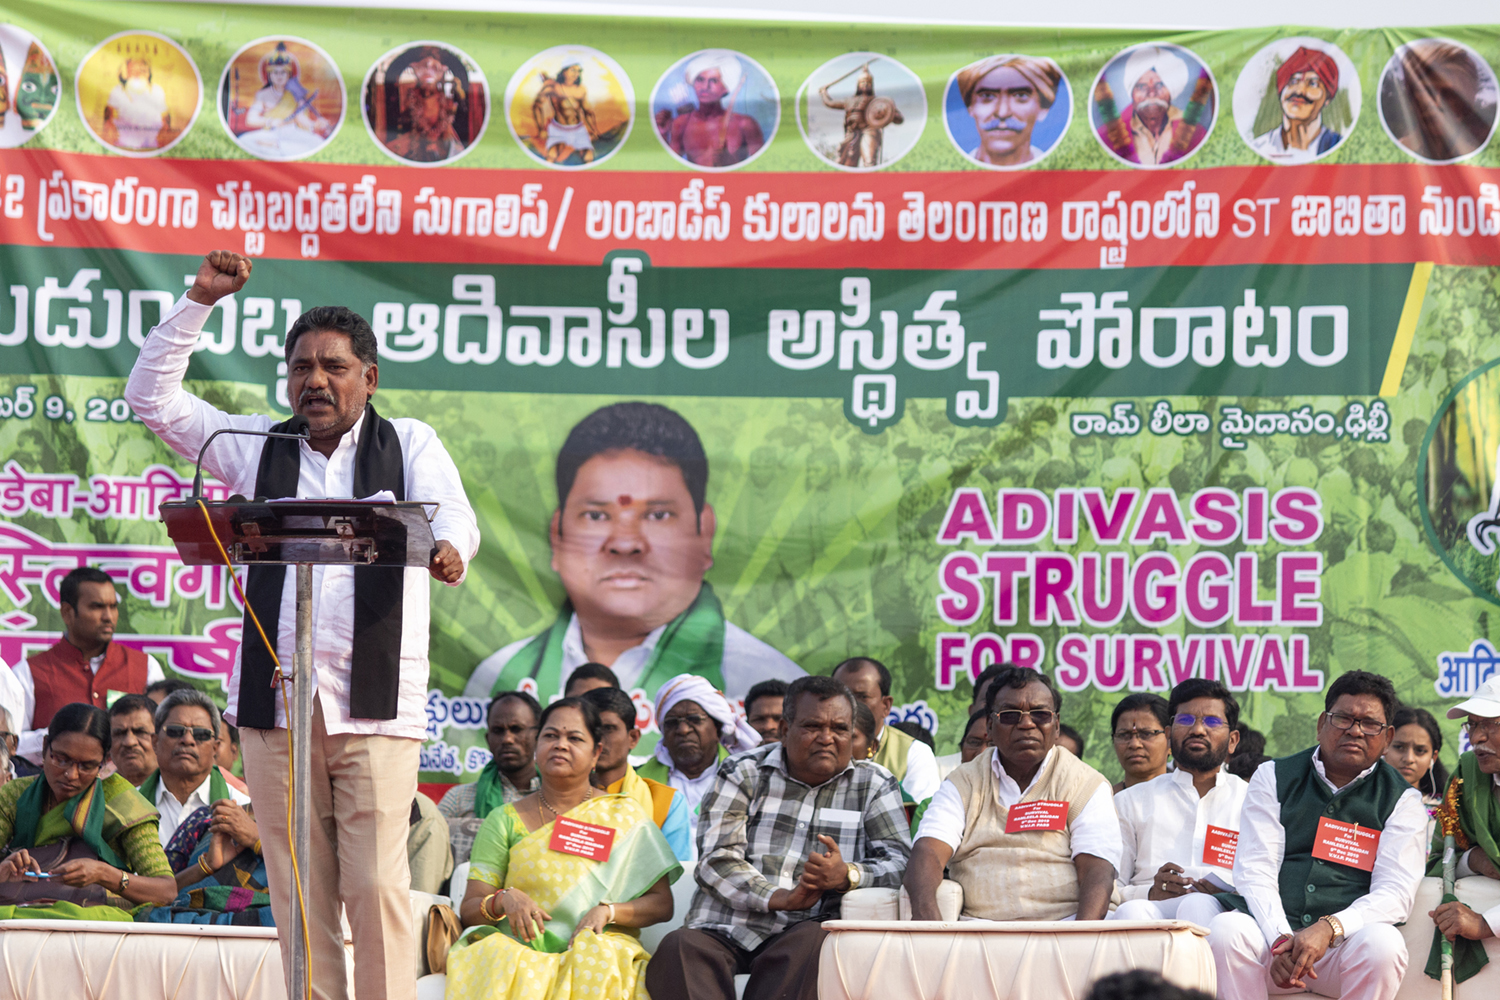 BJP is exploiting the conflict between Adivasis and Lambadas to grow its base in Telangana